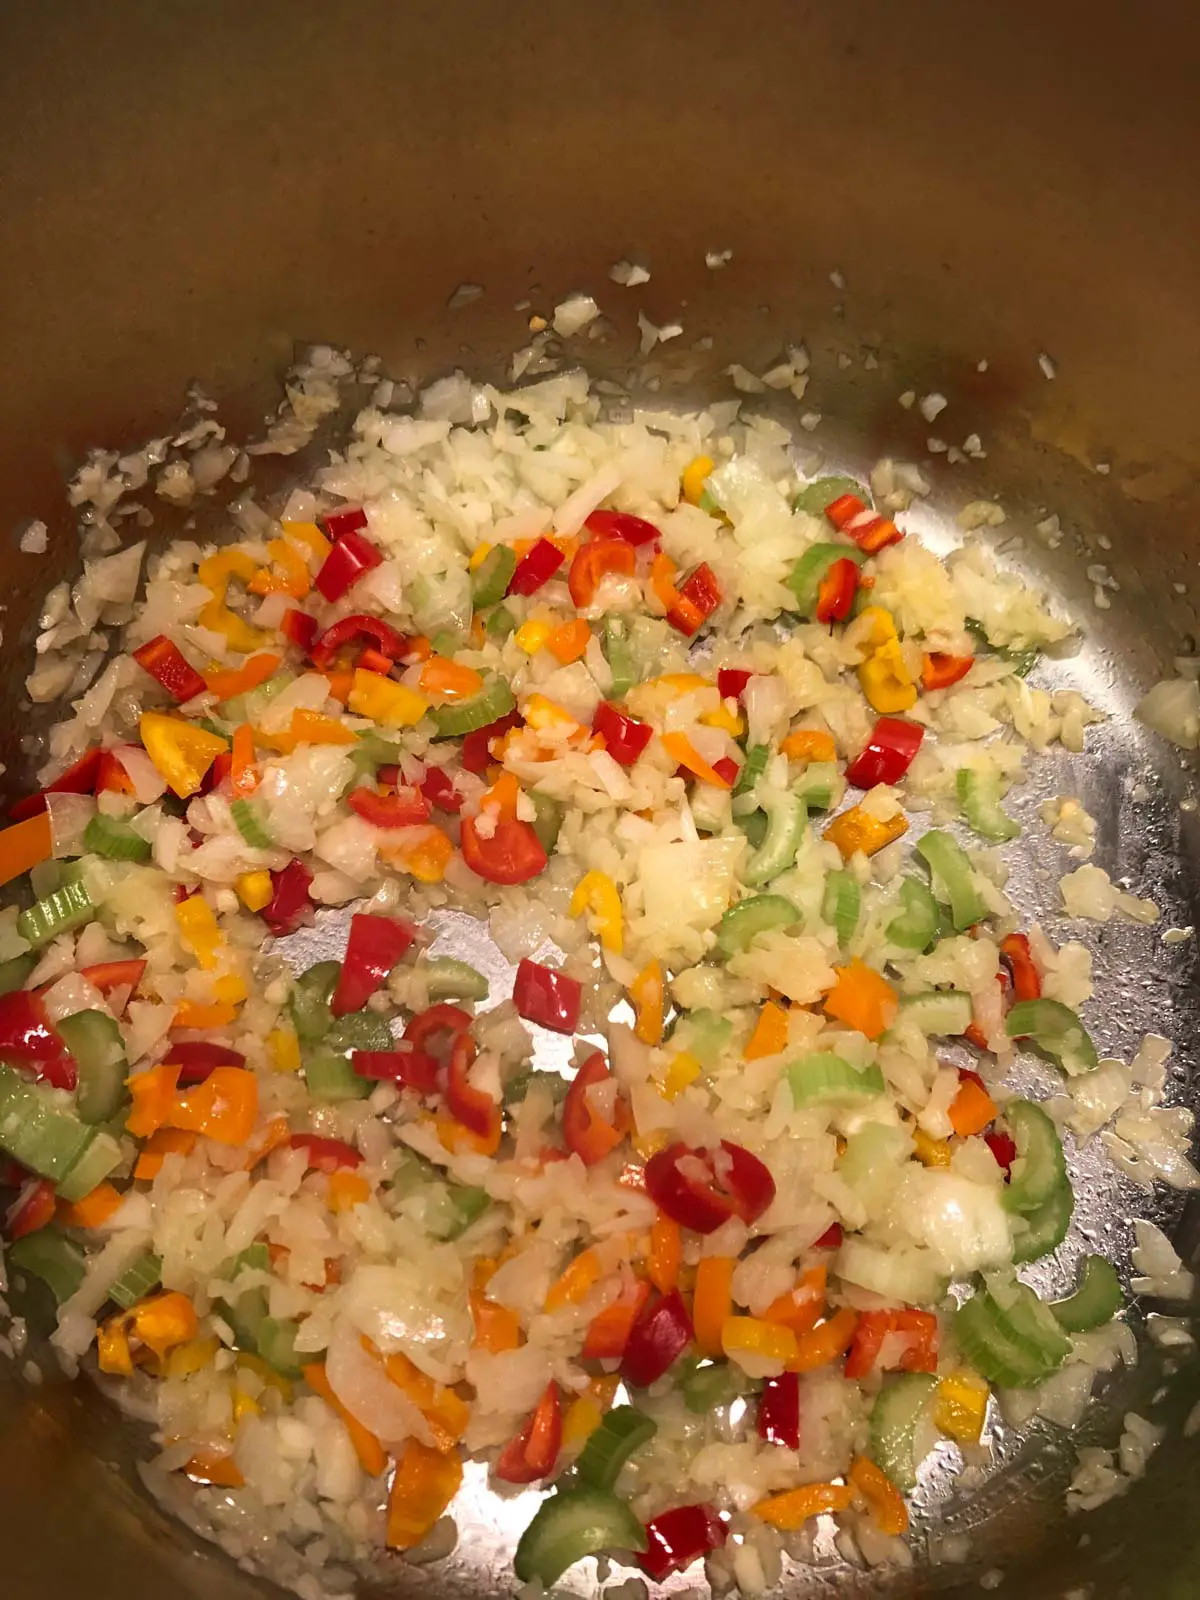 Diced onion, garlic, sweet bell peppers and celery in a large pot.